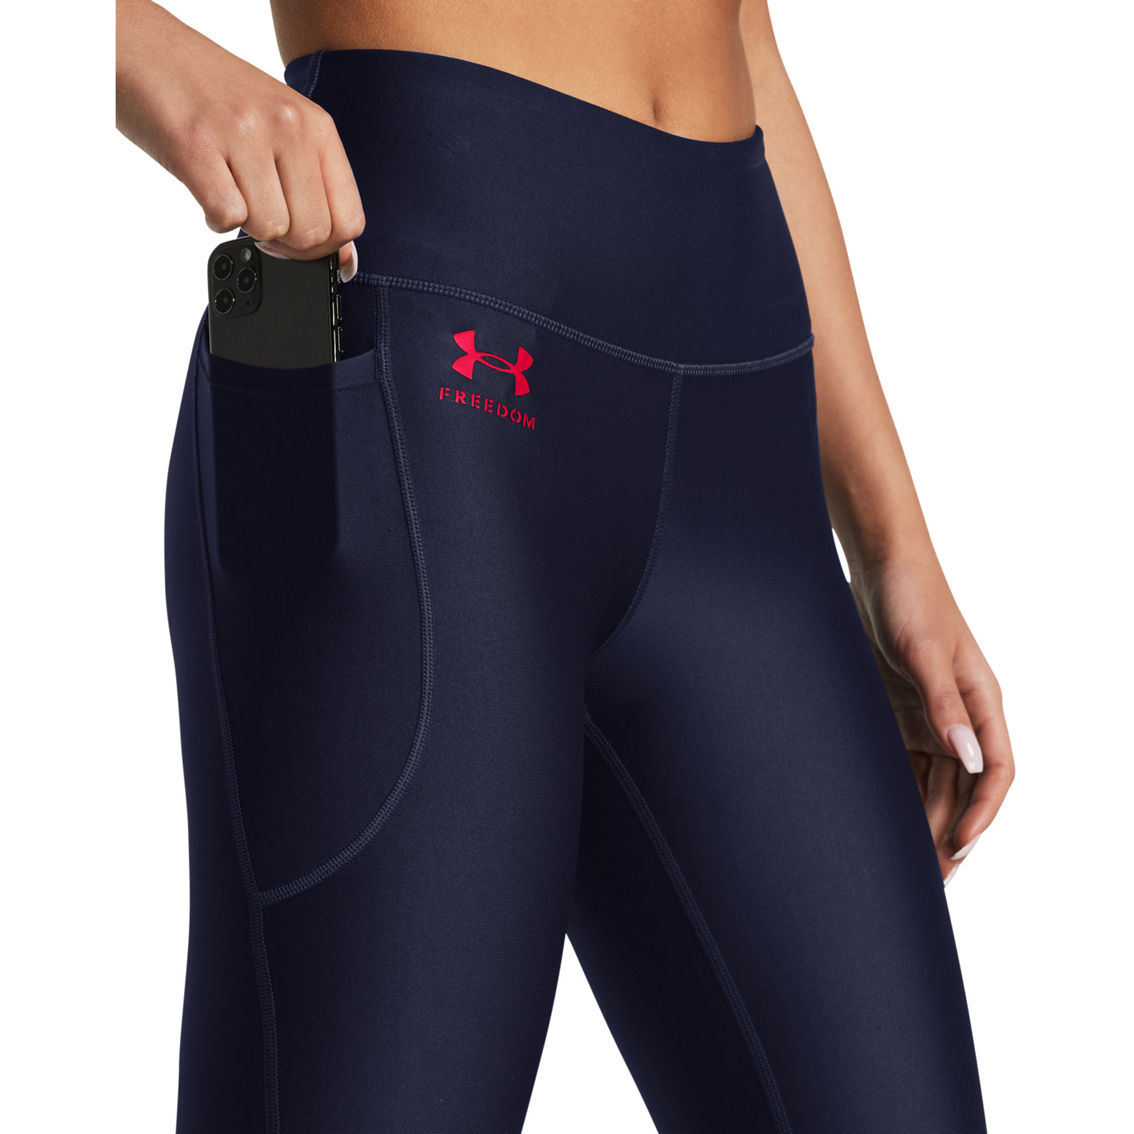 Under Armour Freedom High Rise Ankle Leggings - Image 4 of 6